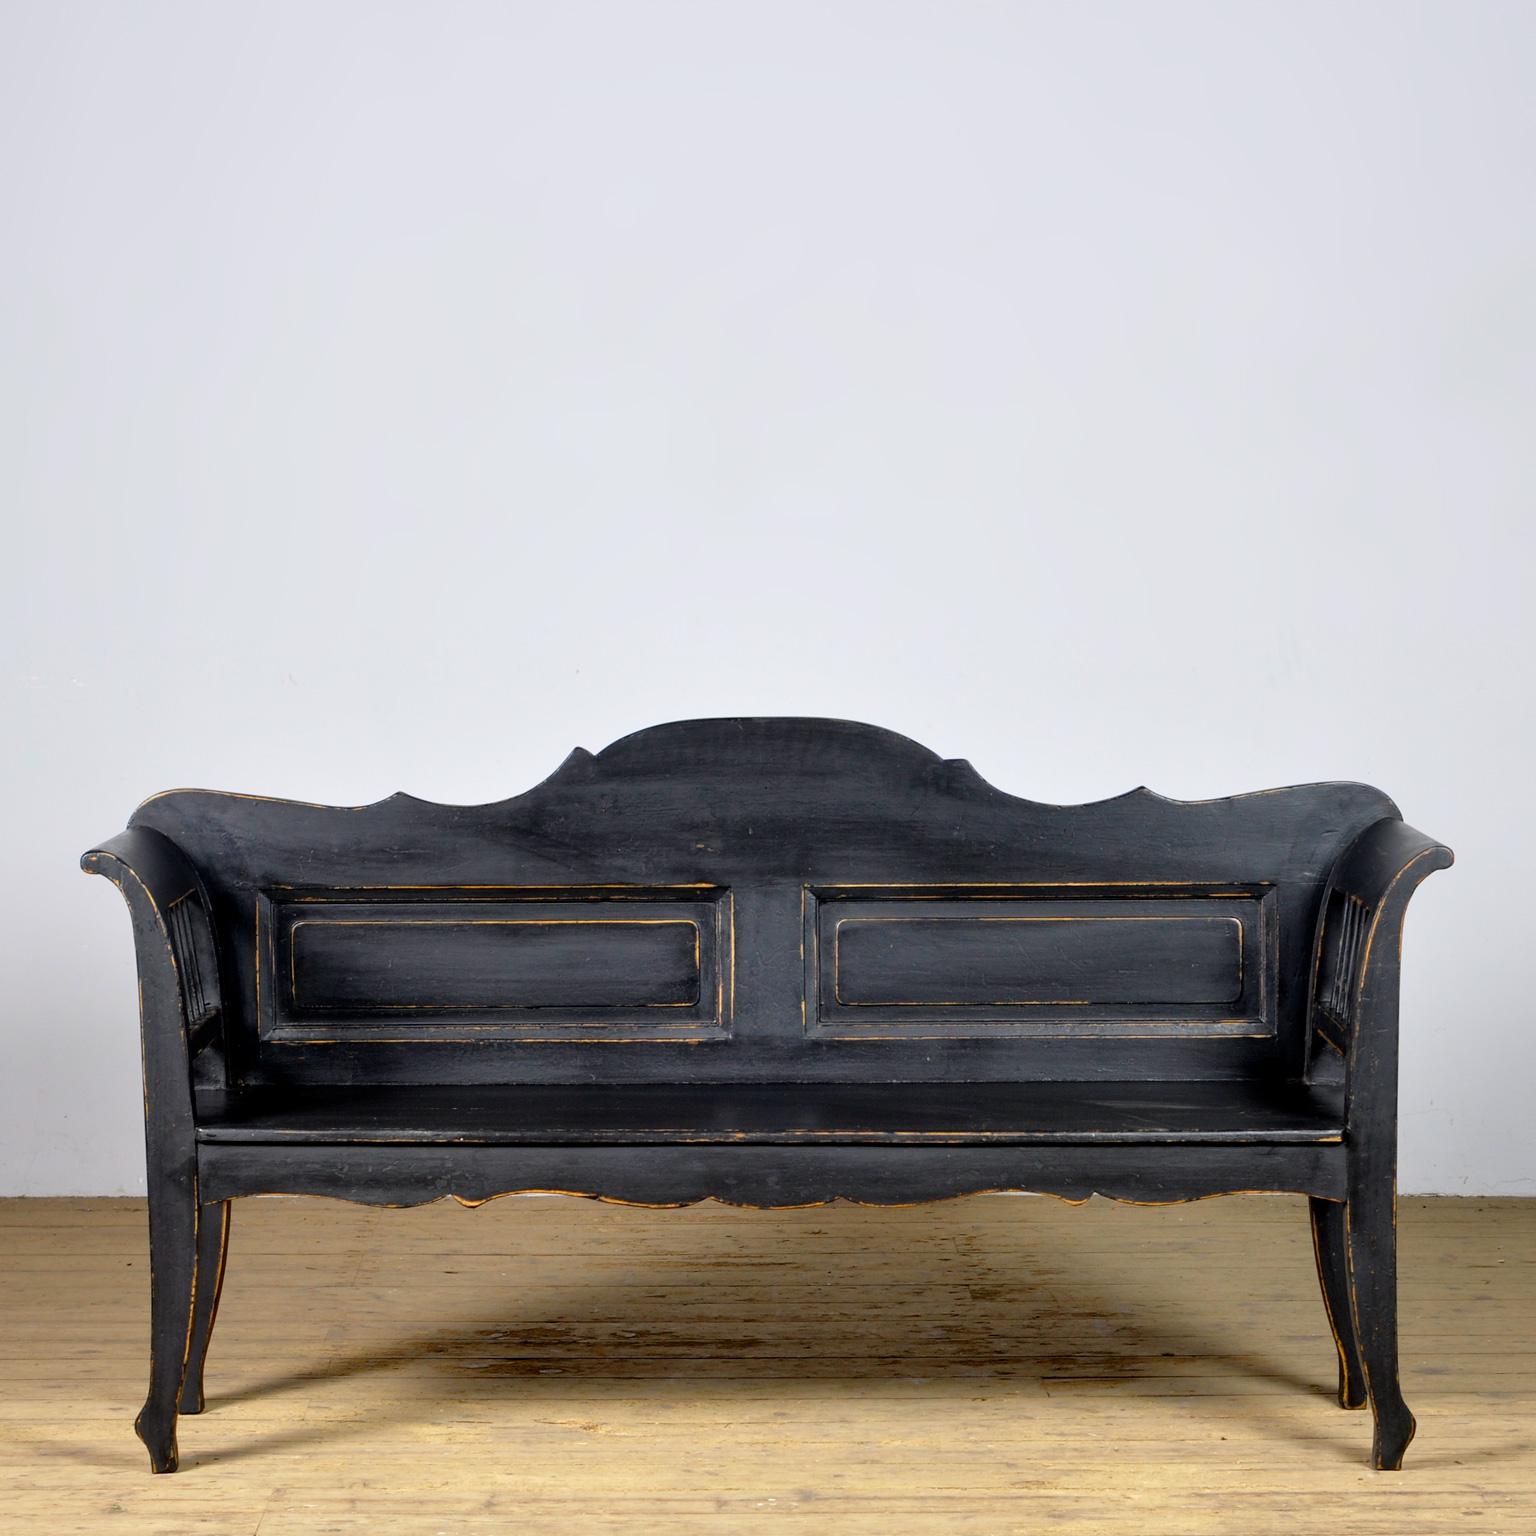 A charming bench from hungary with the original paint. Over time and use, the black paint has been worn away in places to the wood. The bench is stable and sturdy. Free of woodworm. 